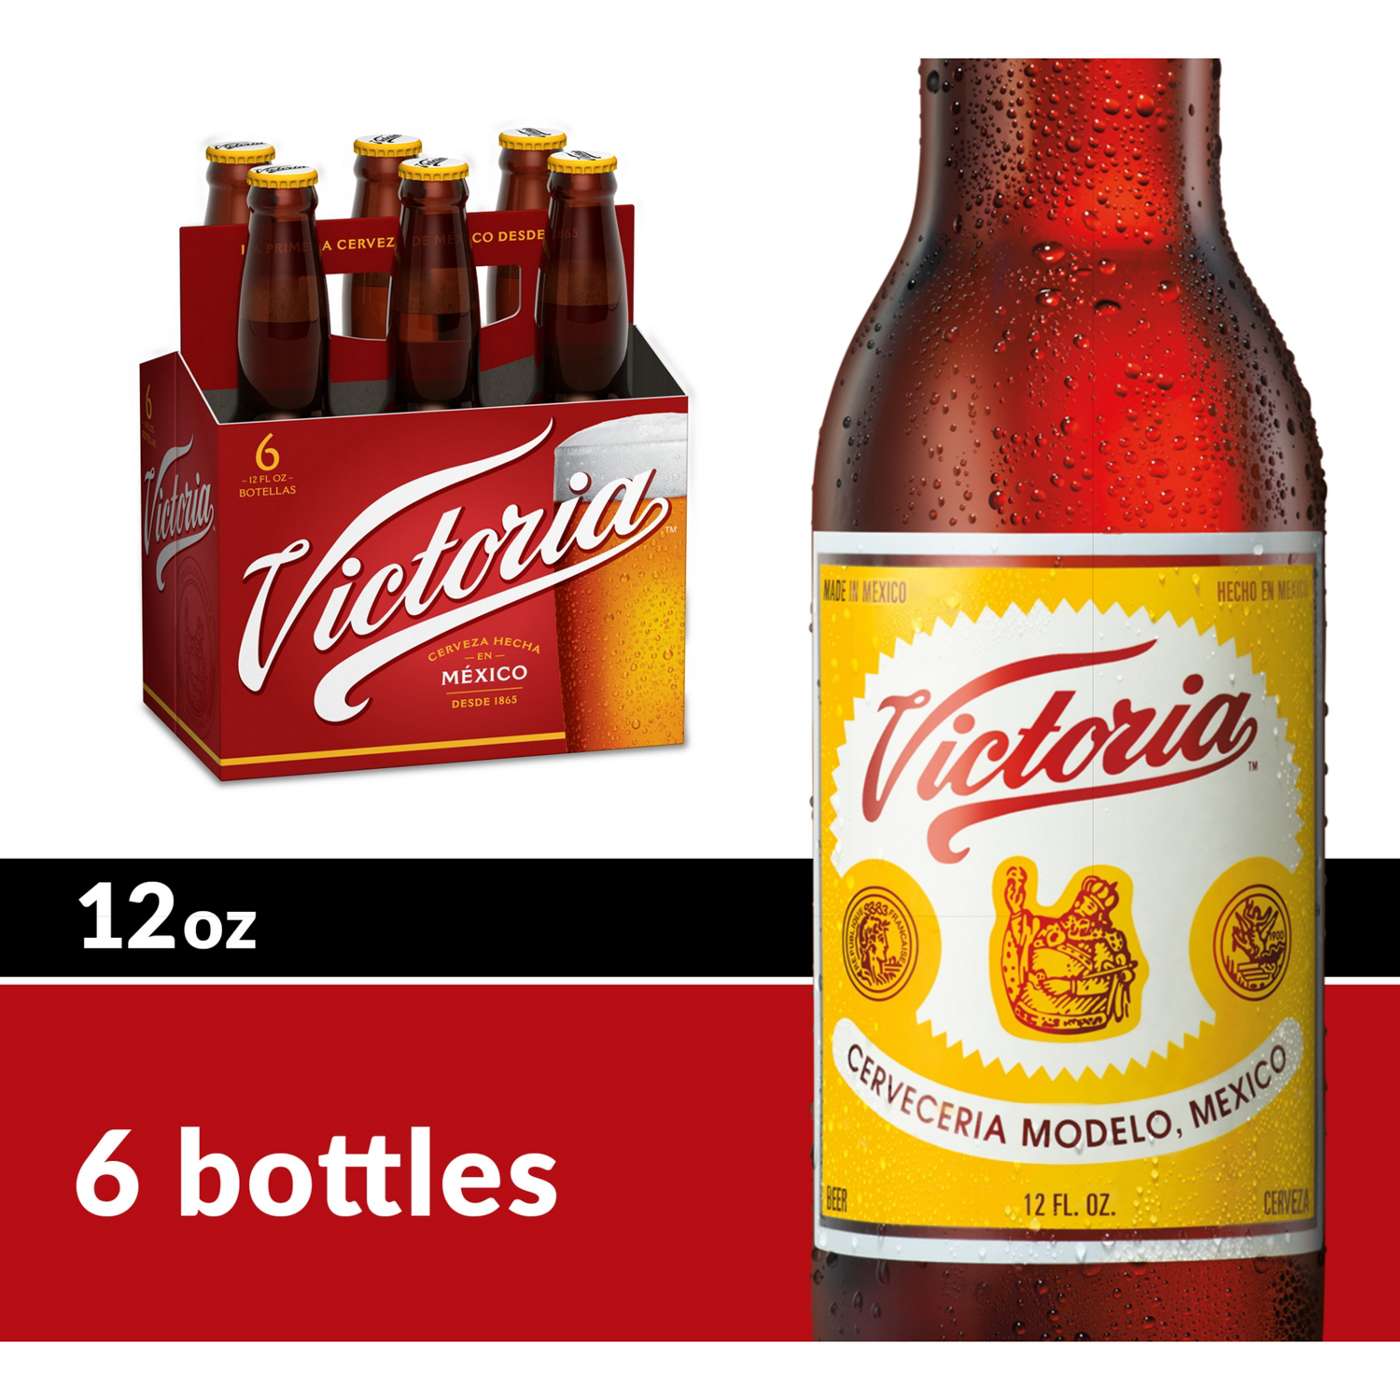 Victoria Amber Lager Mexican Beer 12 oz Bottles, 6 pk; image 3 of 8